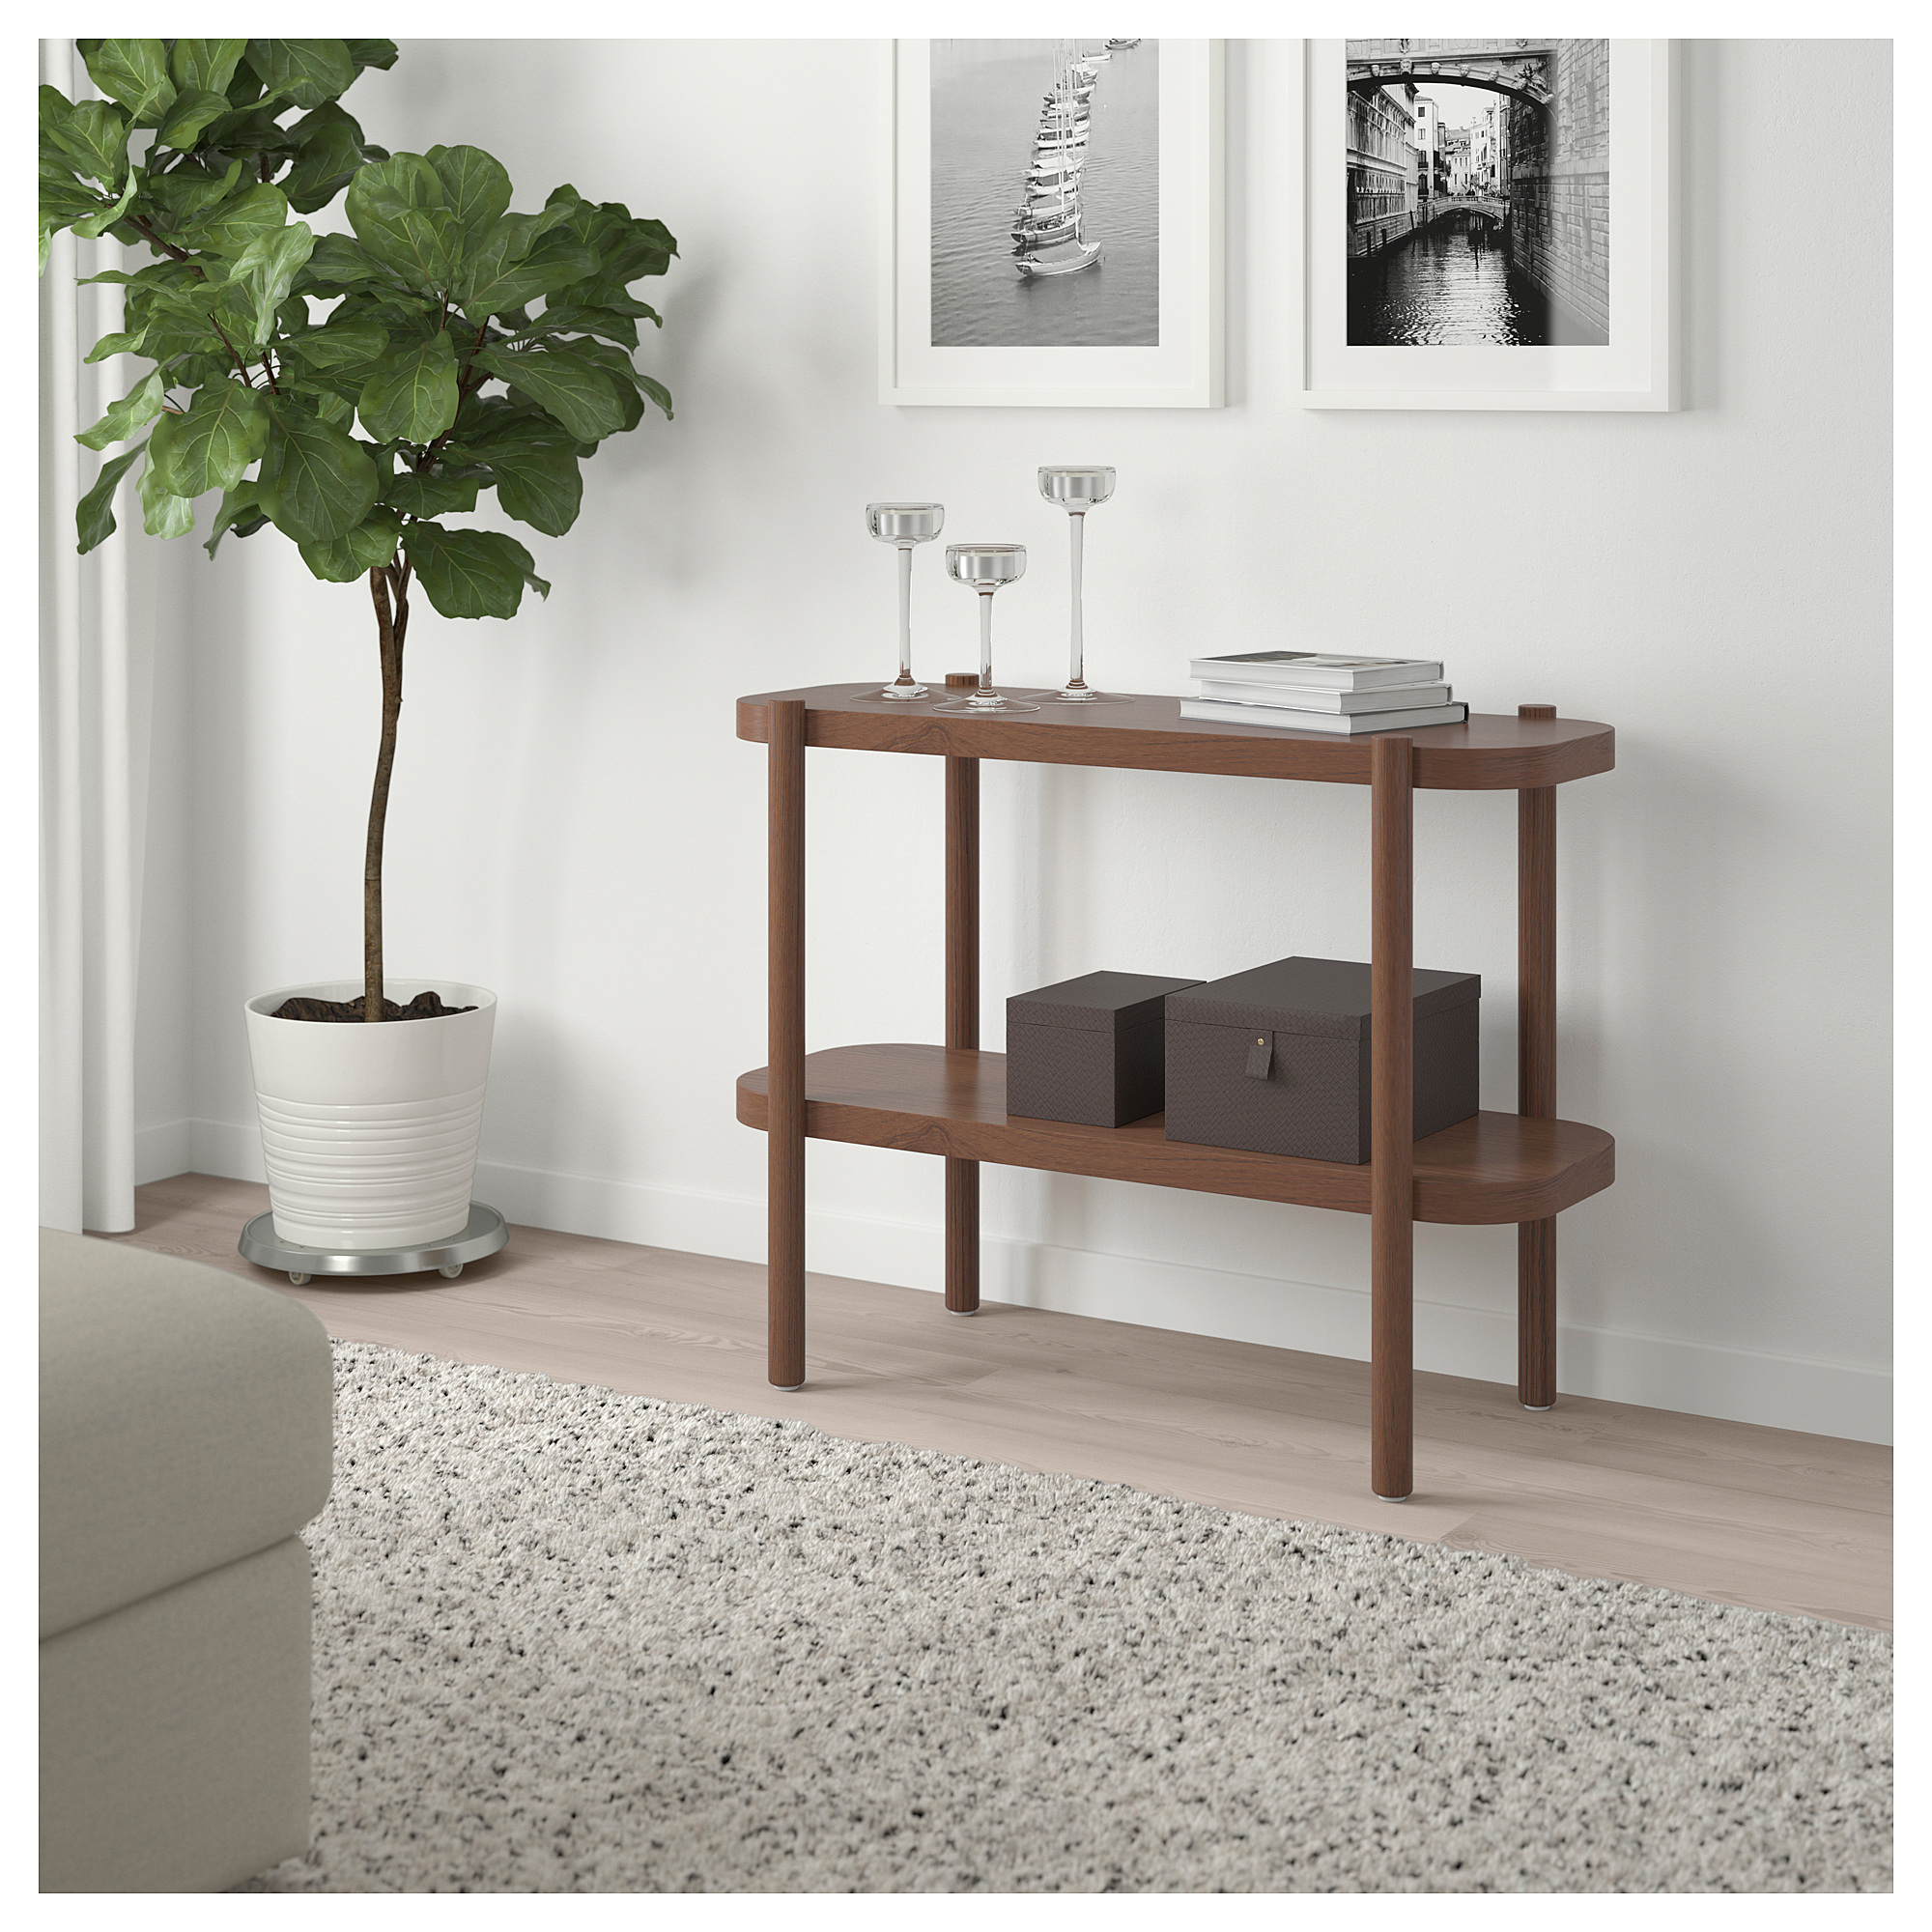 LISTERBY - console table, brown | IKEA 